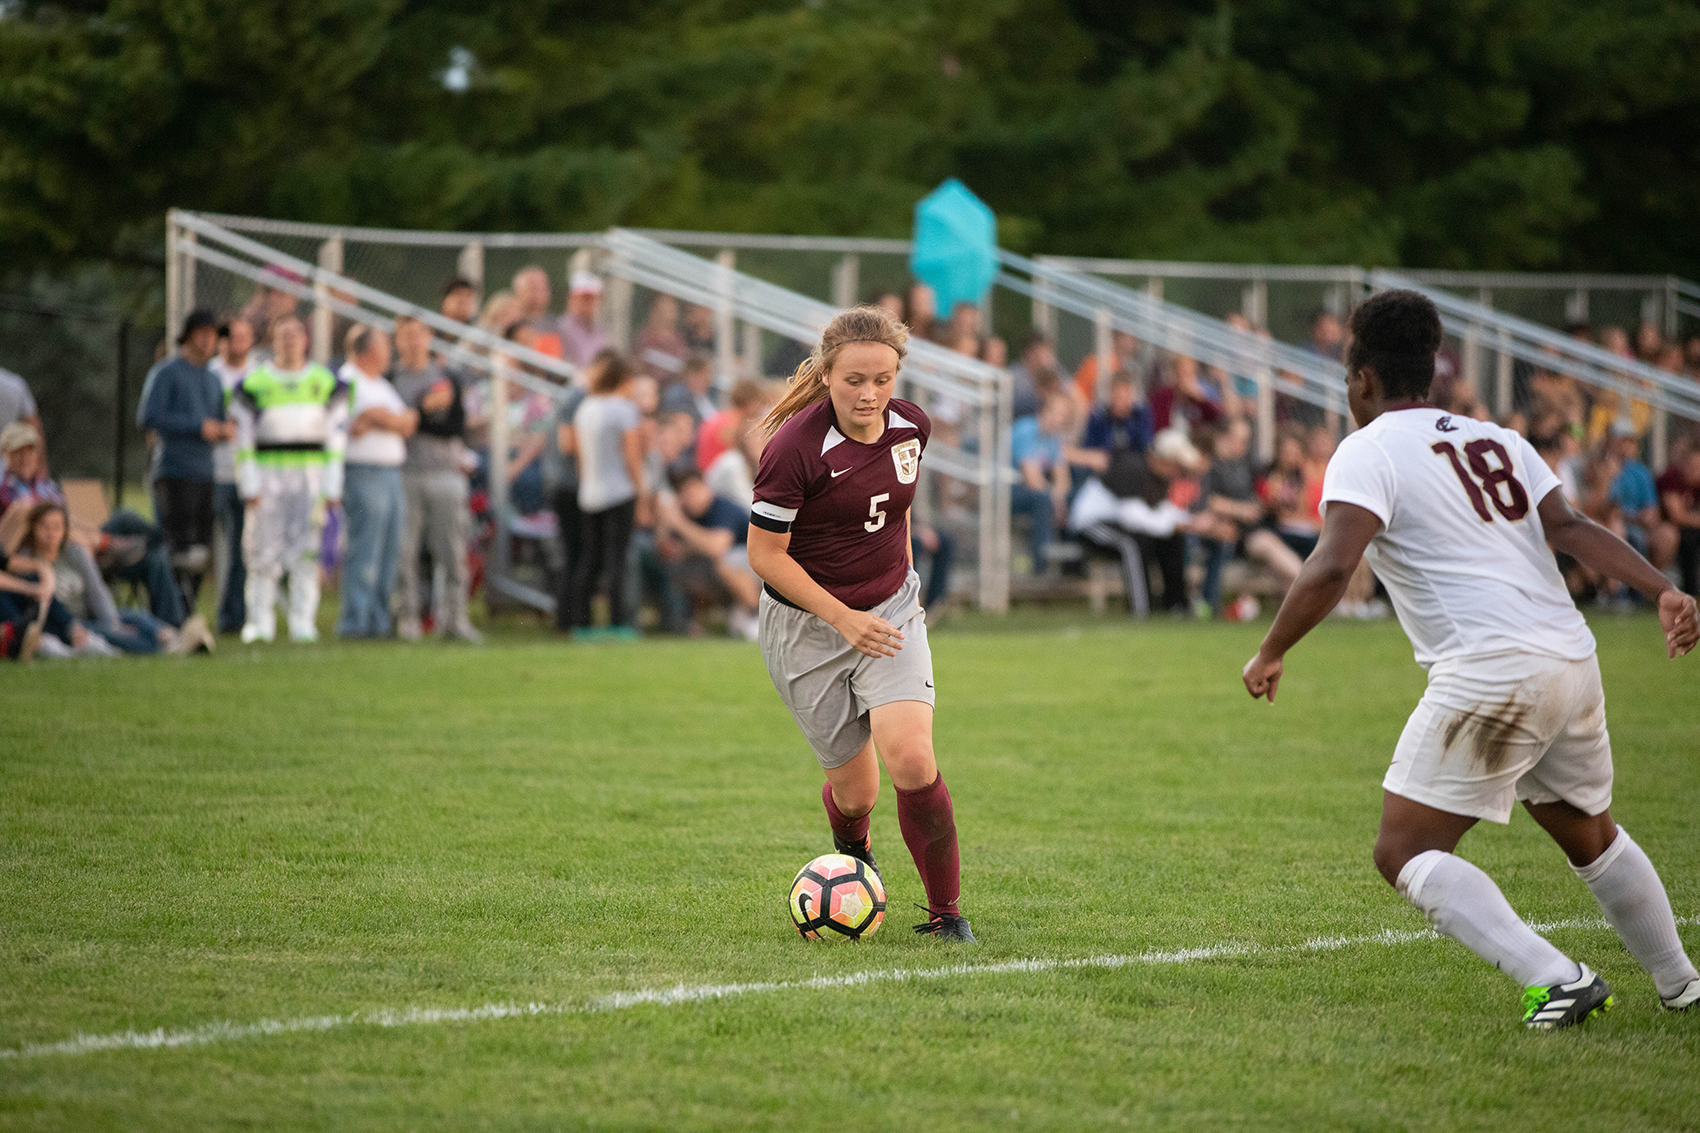 Lyndi Shepard drives to the goal against Eureka College (Photo Credit: Brittany Appell)